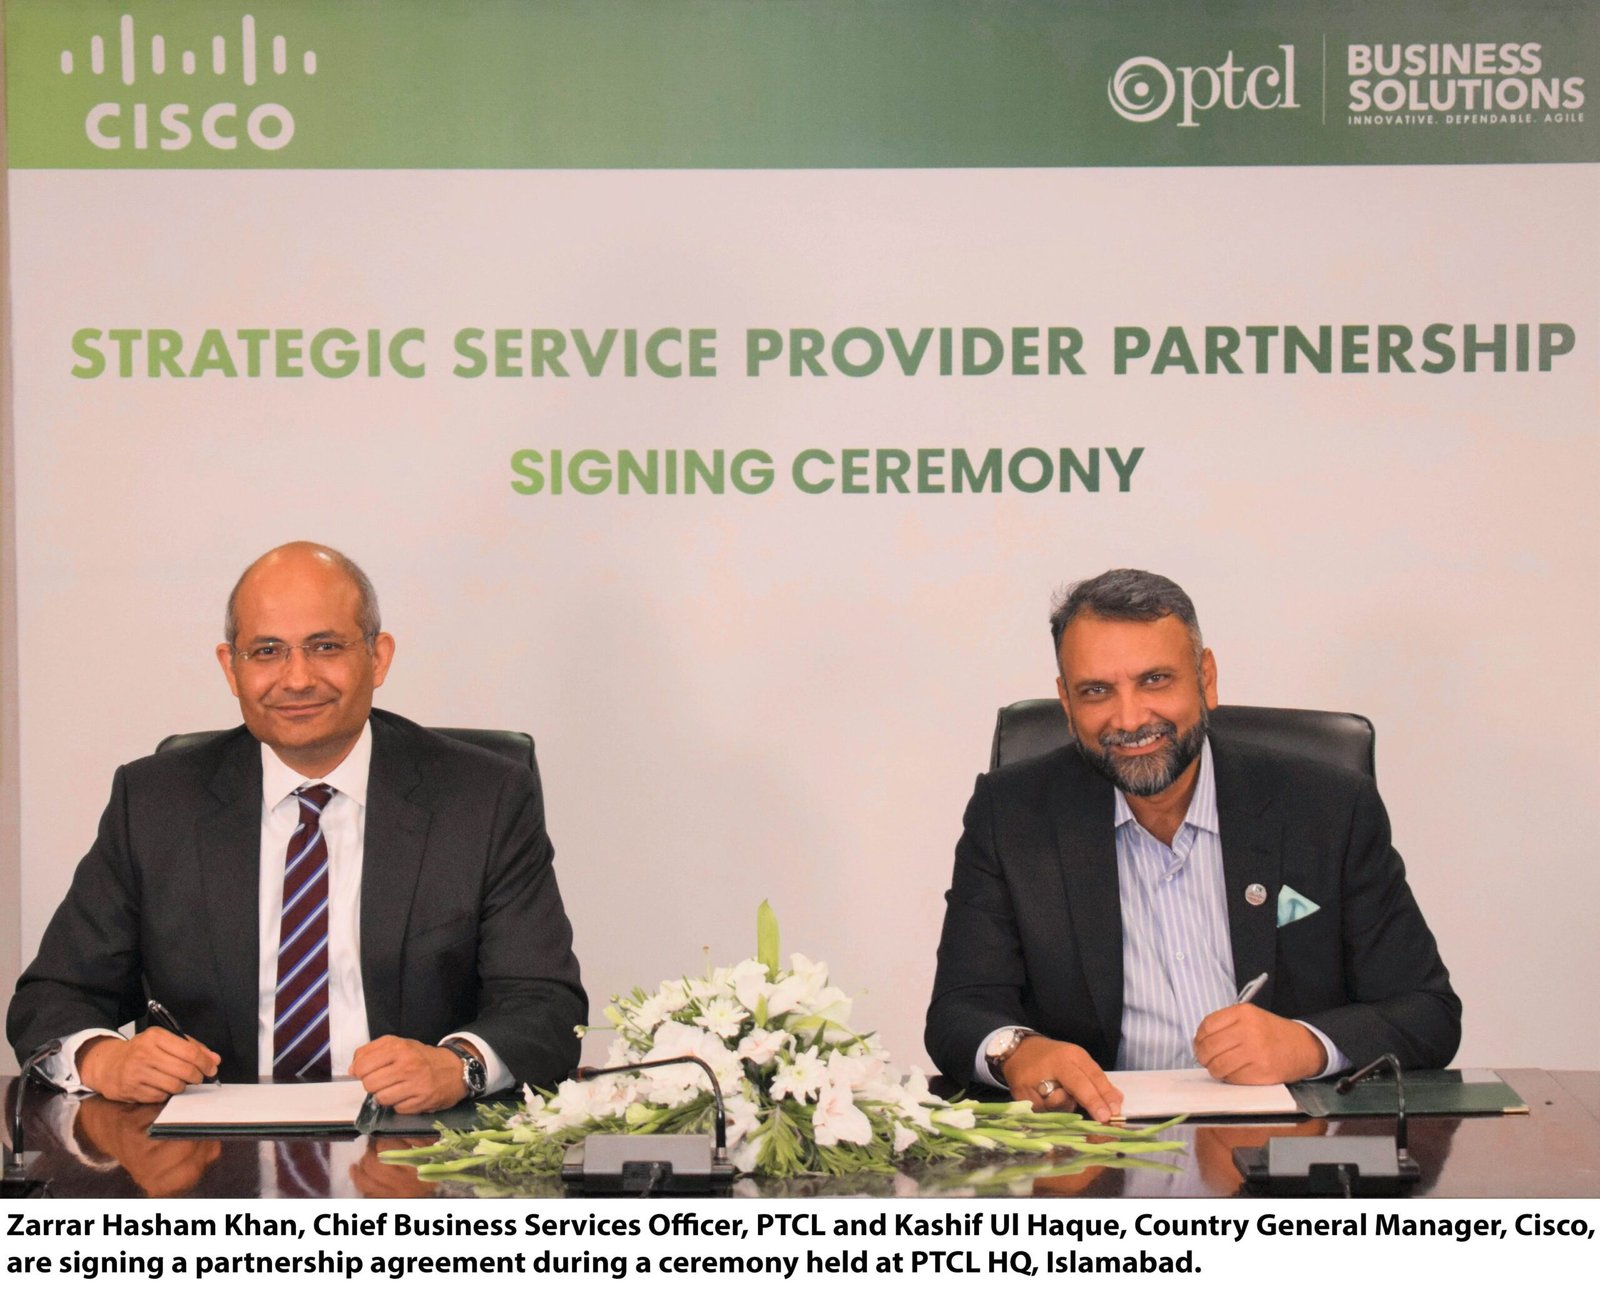 PTCL, Cisco sign service provider agreement to modernise IT infrastructure